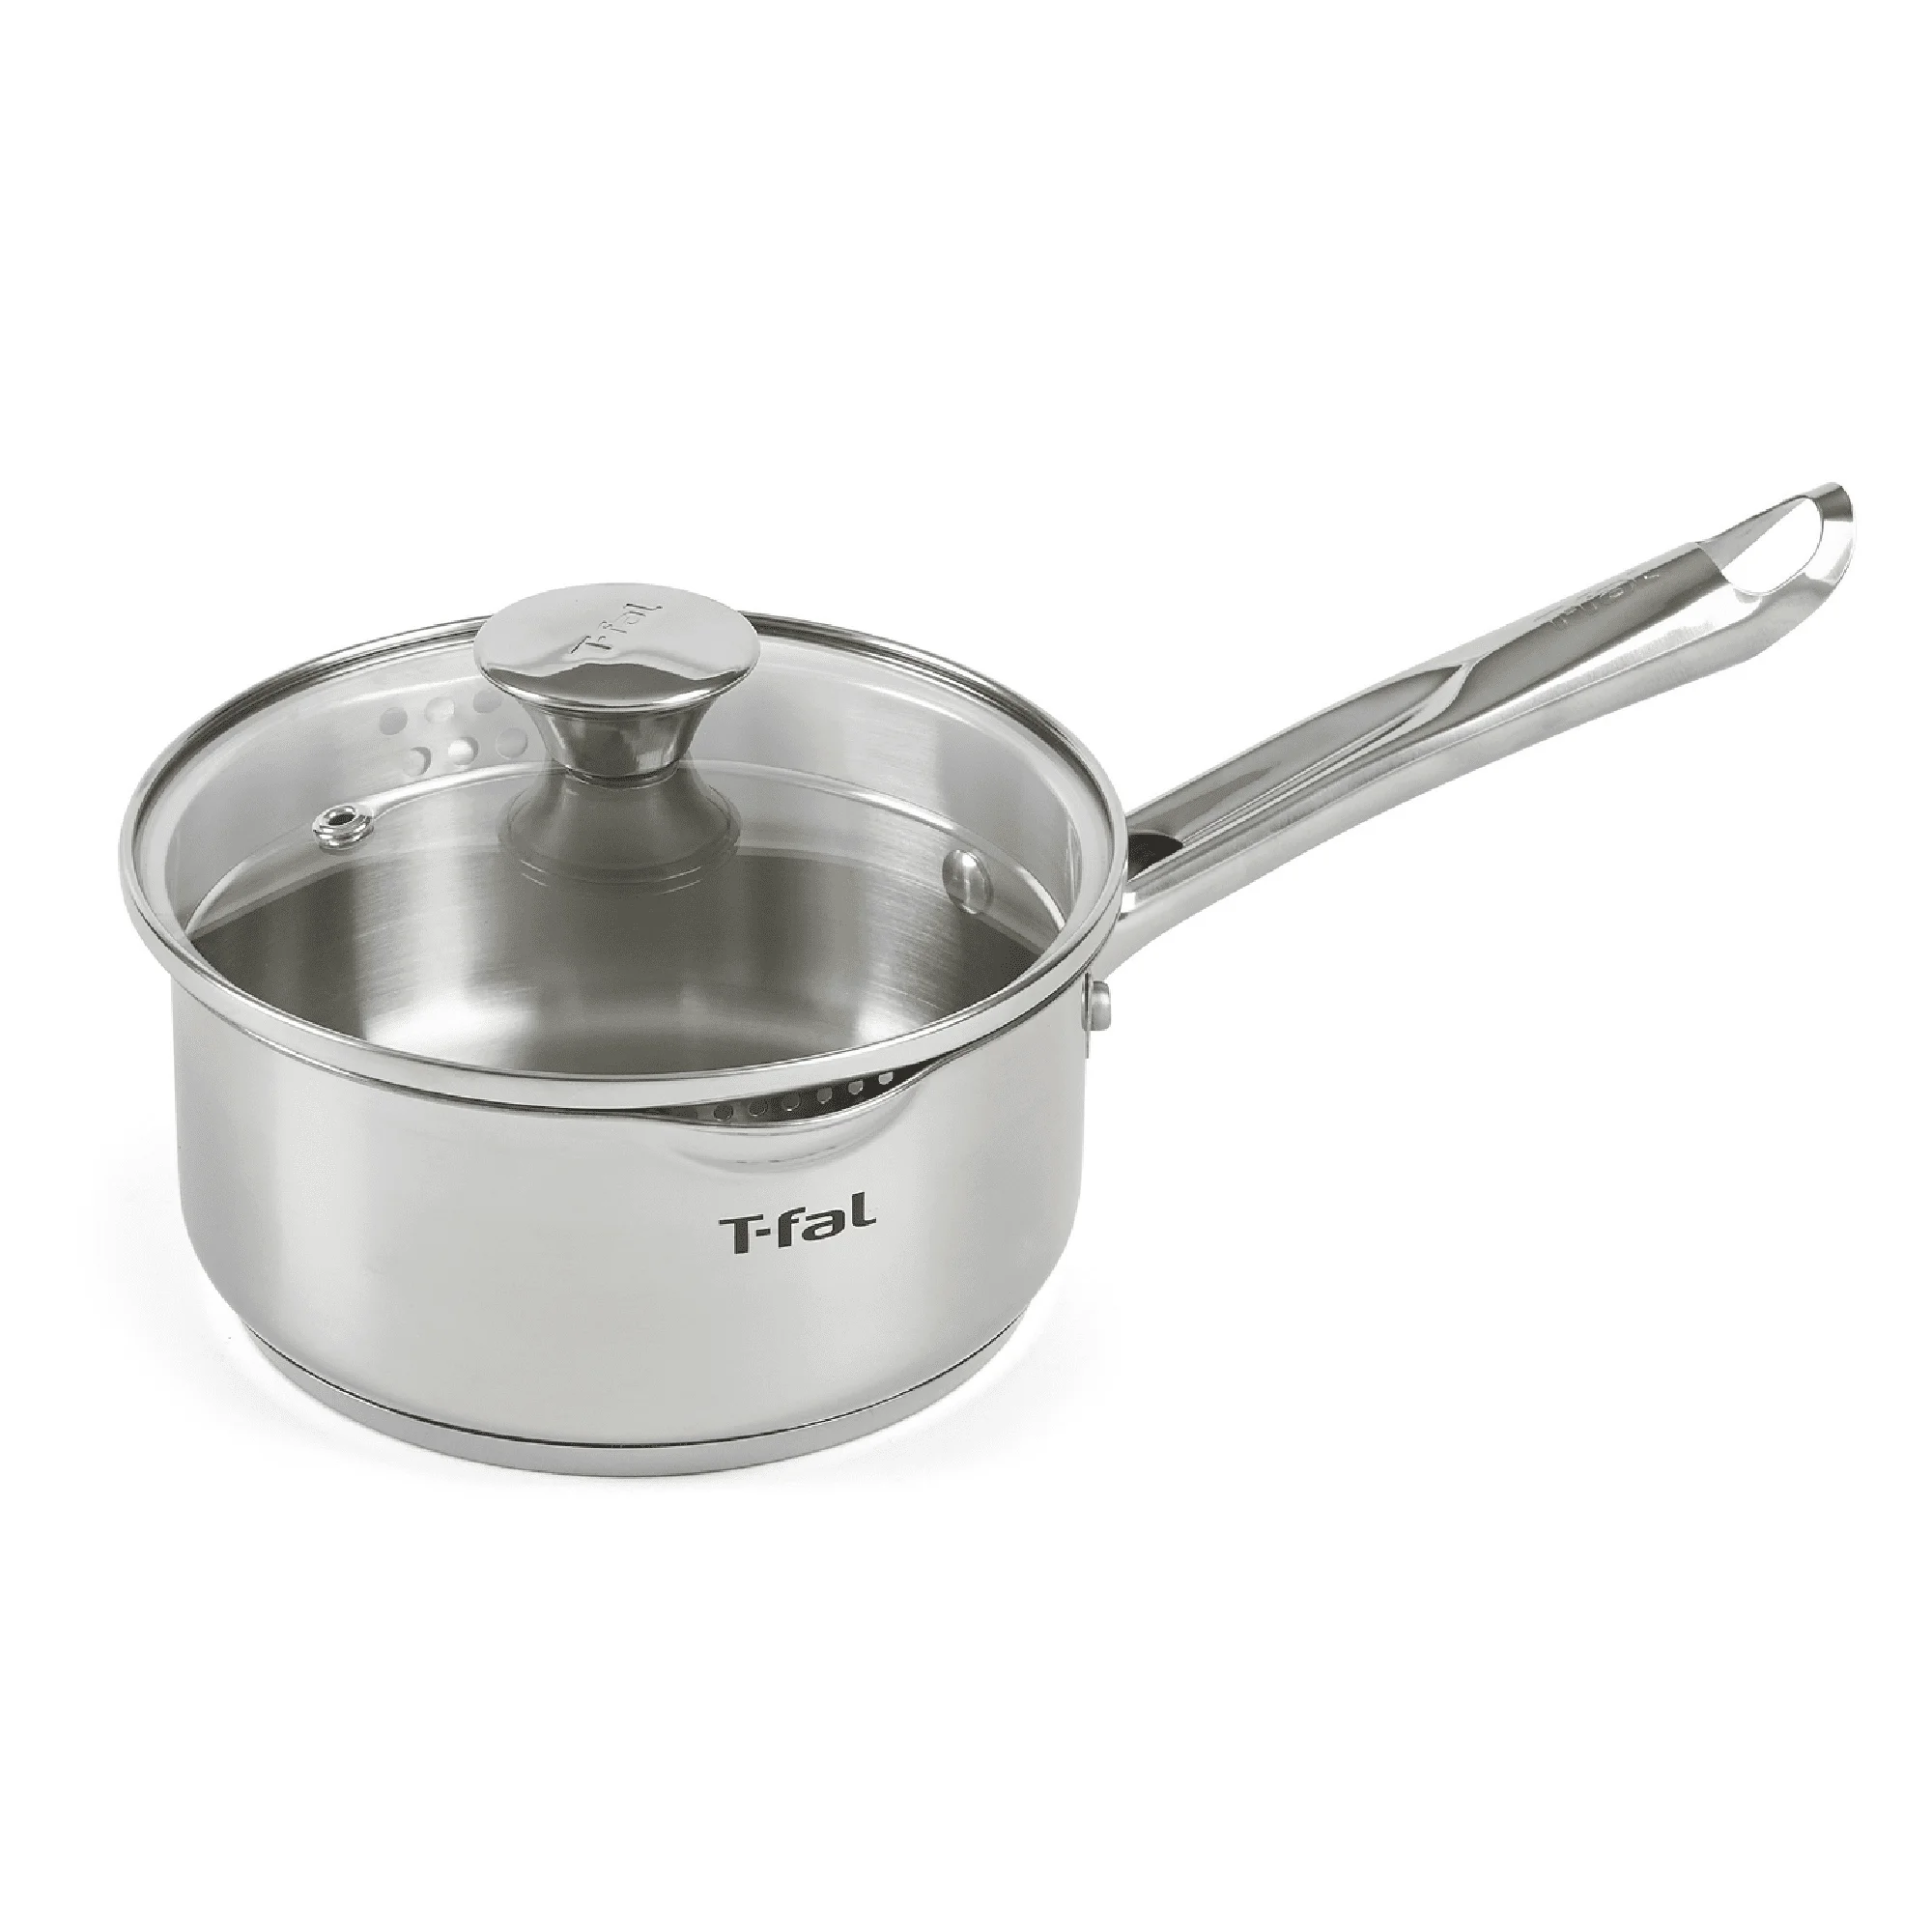 

T-fal Cook & Strain Stainless Steel Cookware, Sauce Pan with lid, 1.5 quart